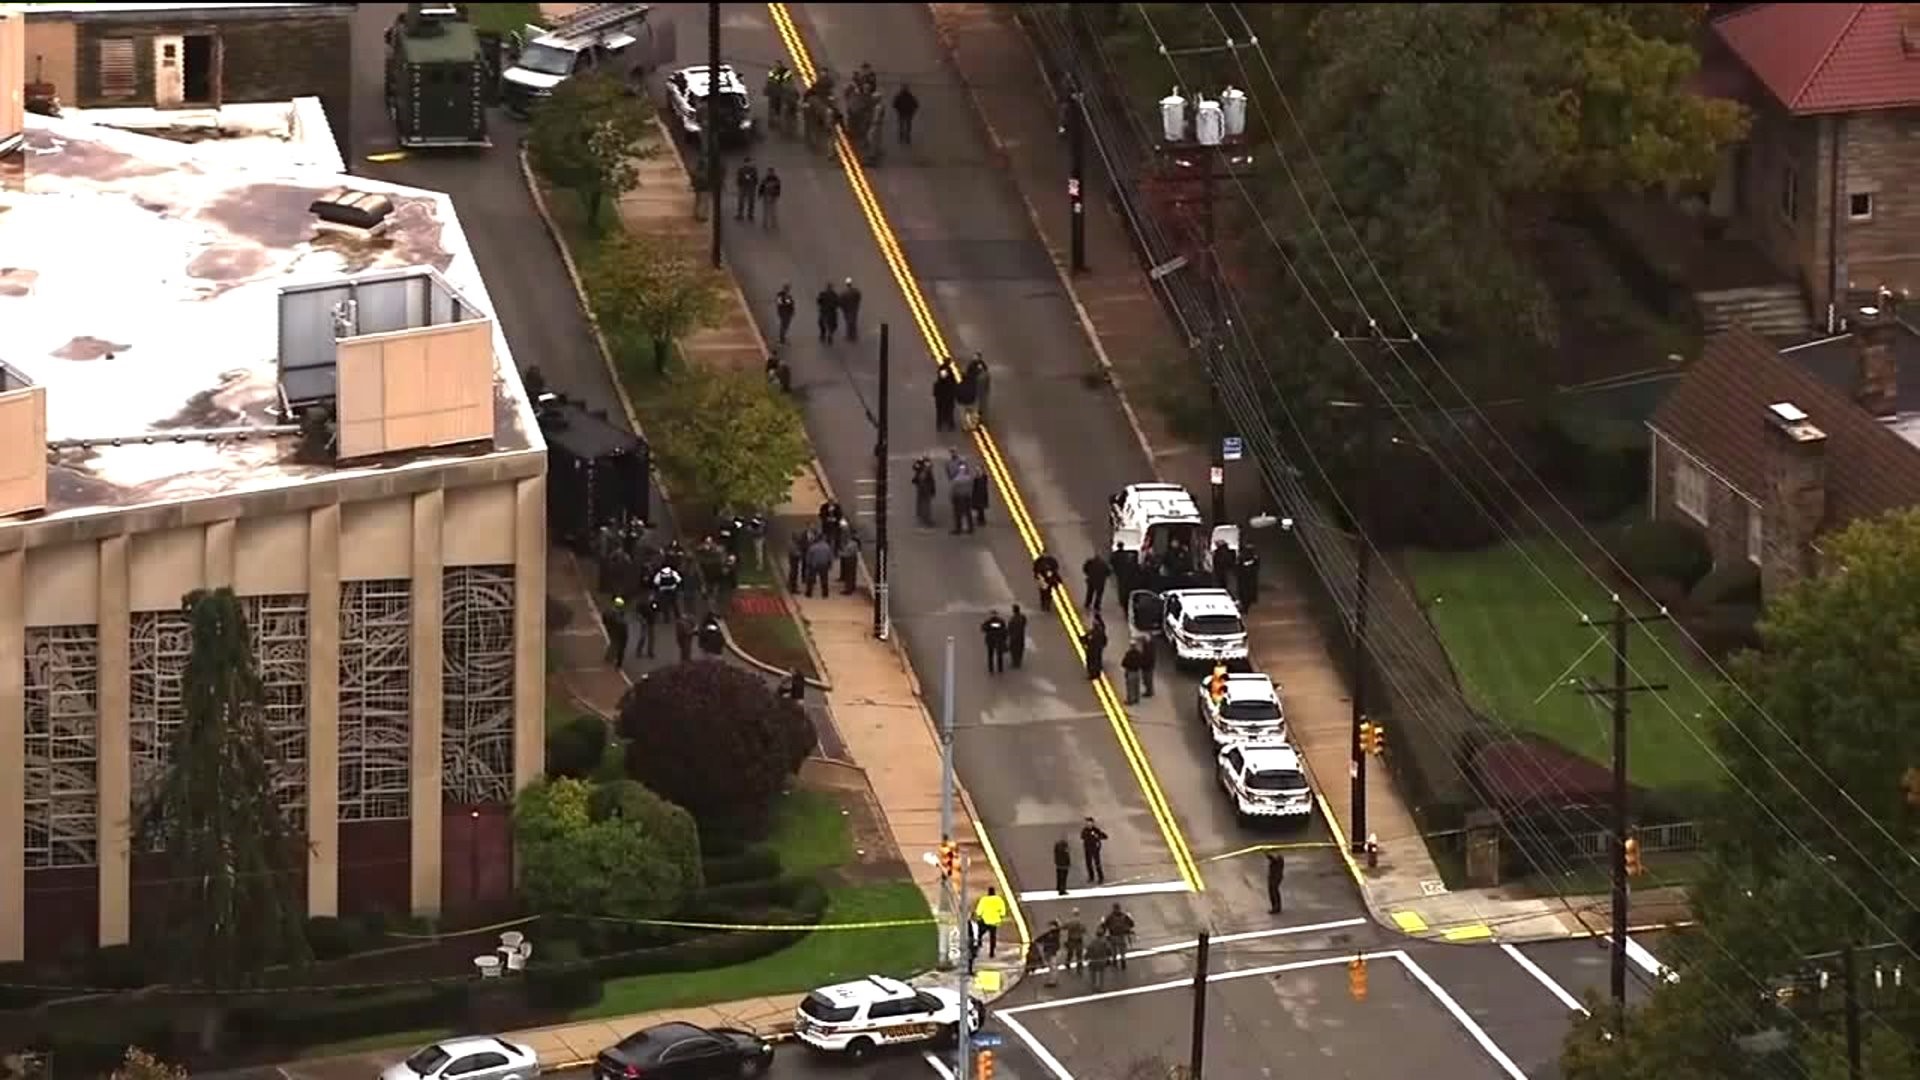 'It's Astonishing' -- Worshippers React to Synagogue Shooting